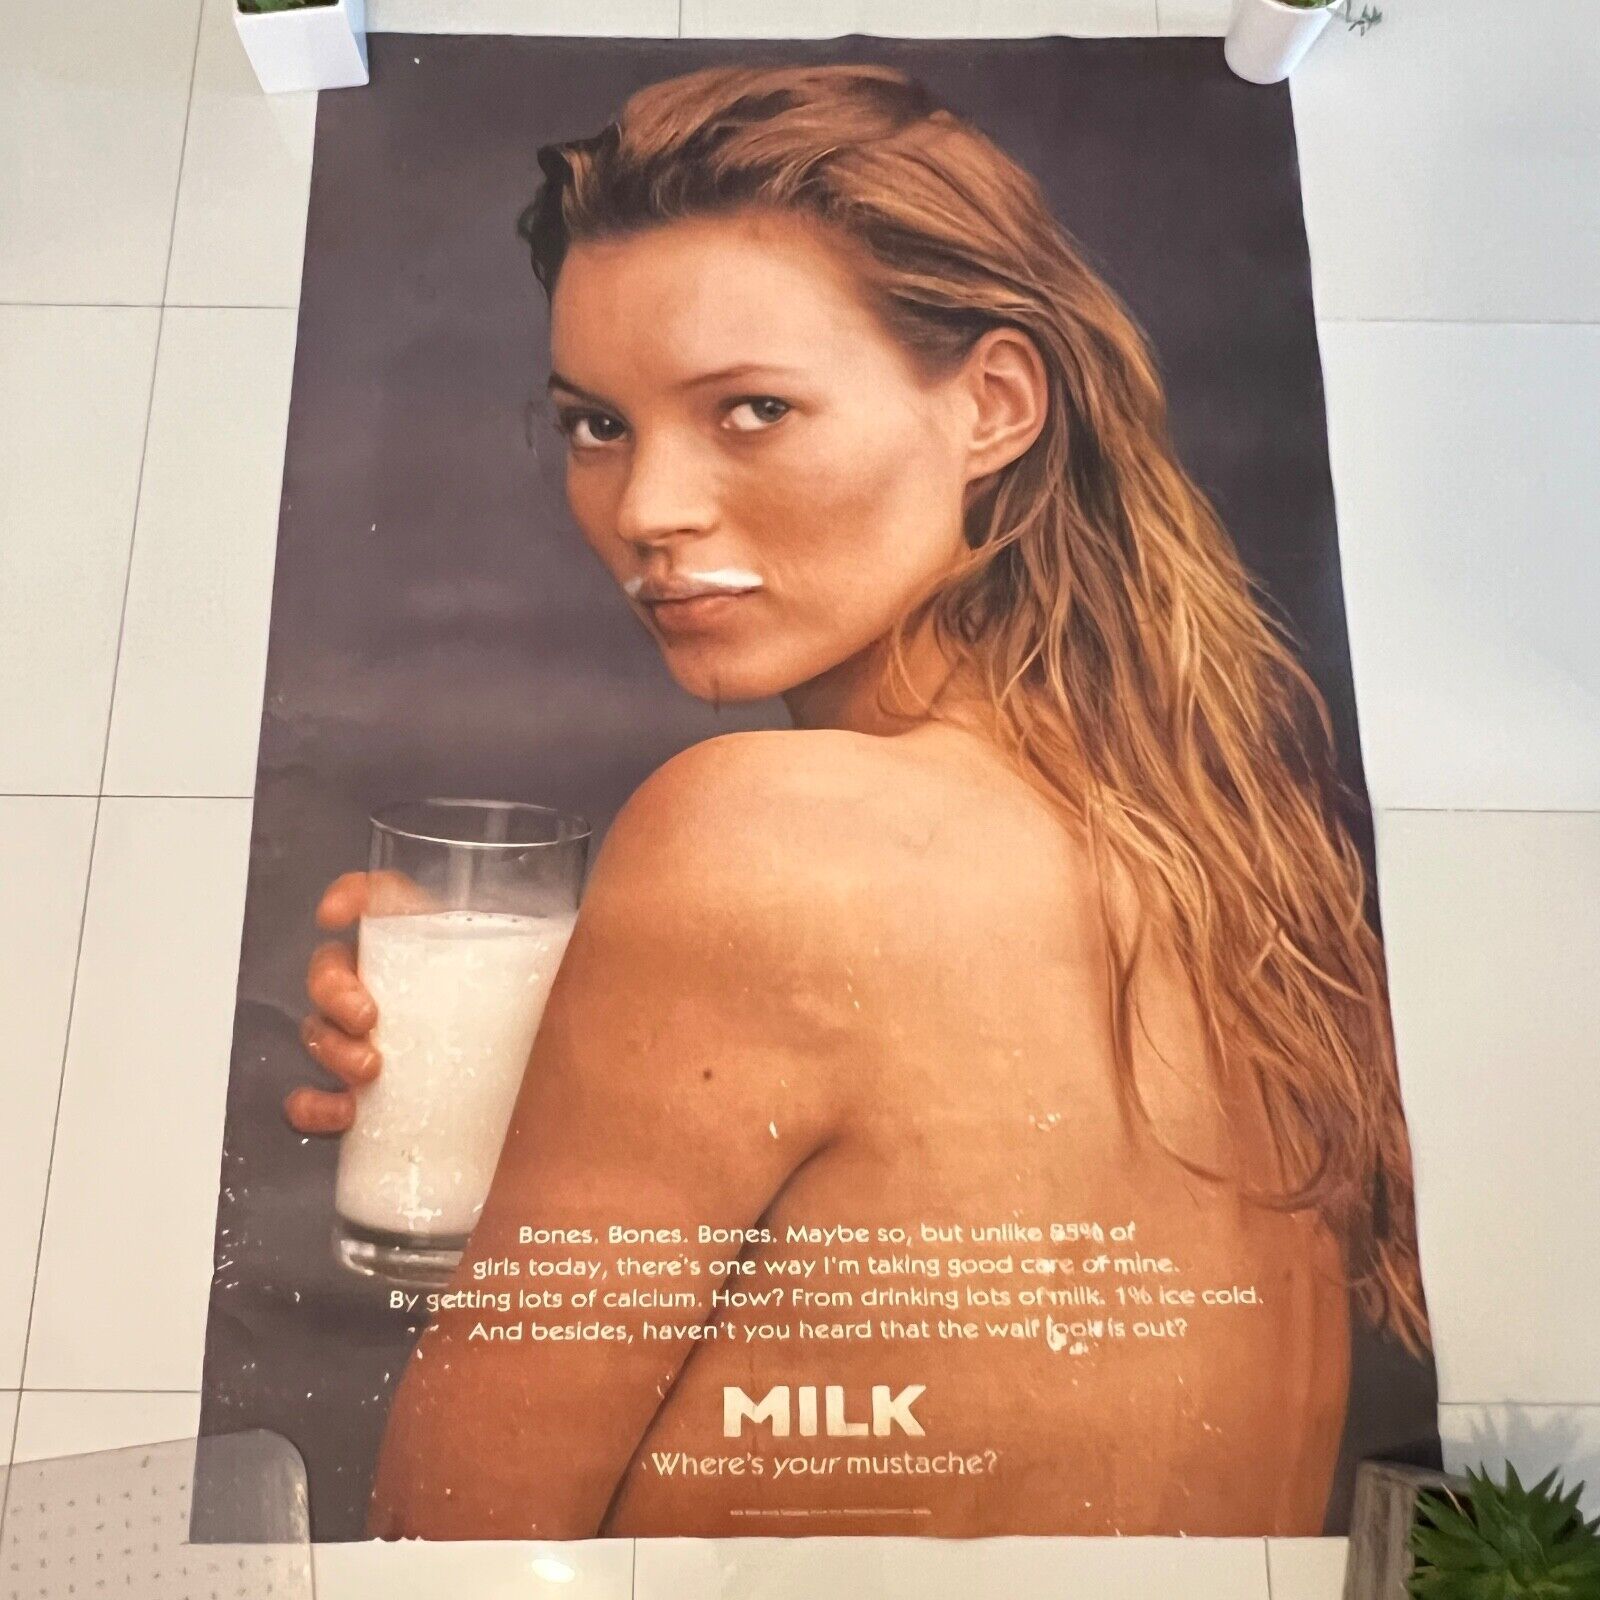 Vintage Kate Moss Got Milk Topless Ad Bus Shelter Stop Large Poster / 4ft x 6ft